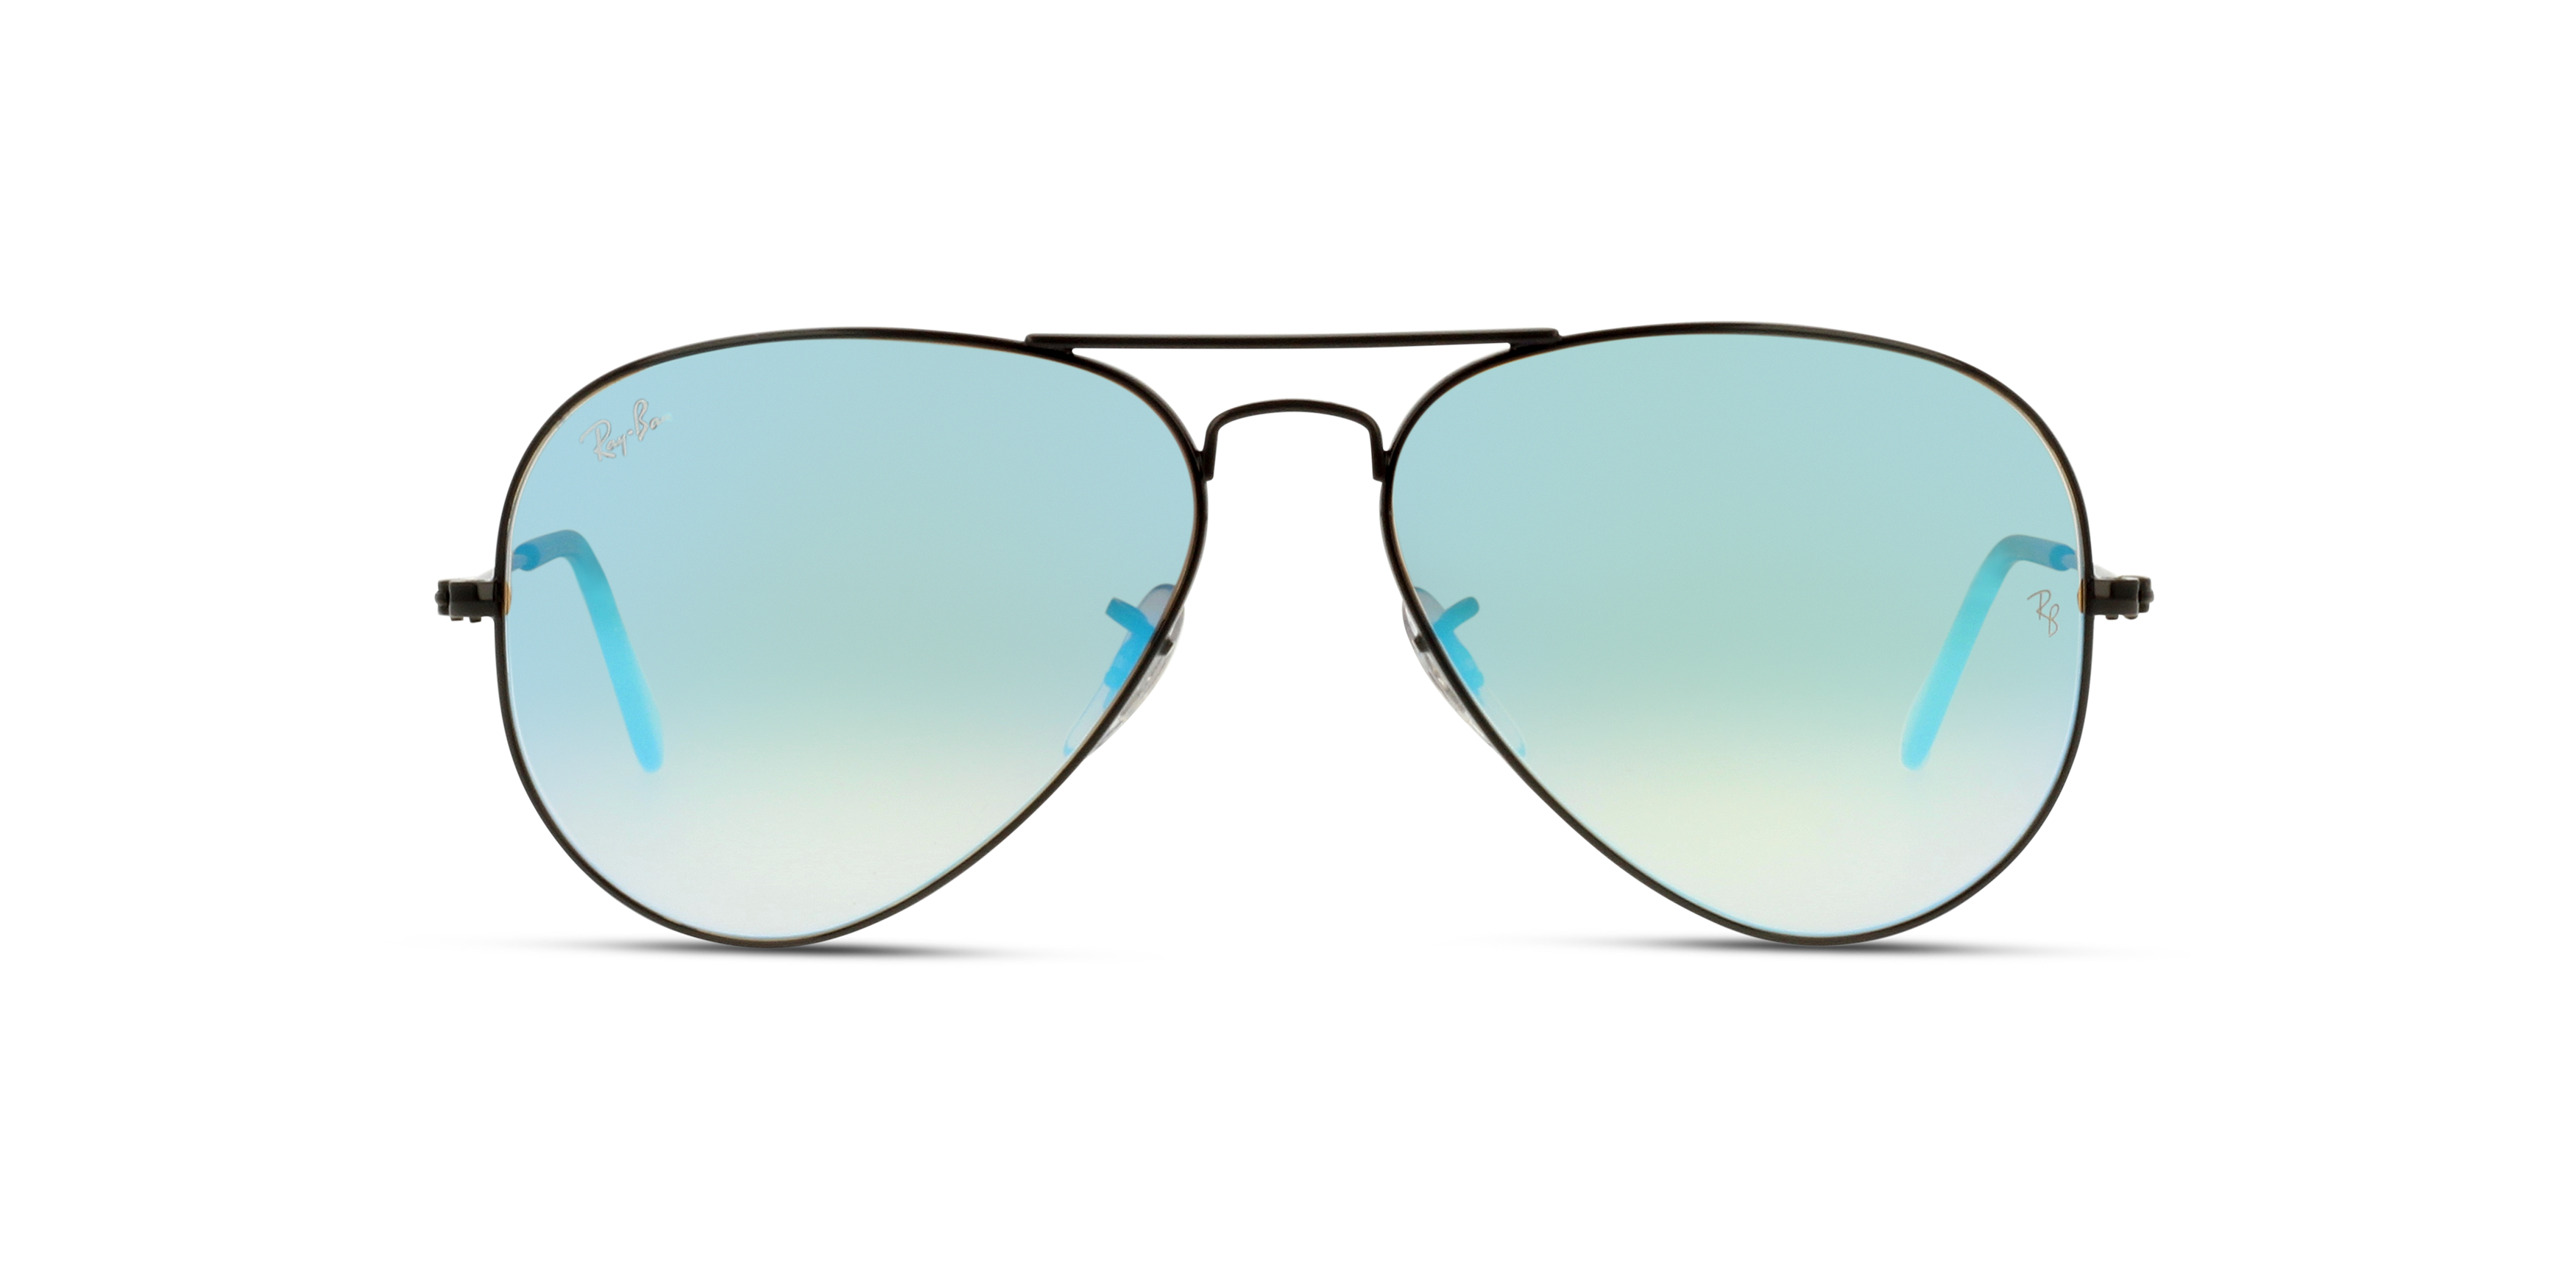 [products.image.front] Ray-Ban Aviator Flash Lenses RB3025 002/4O